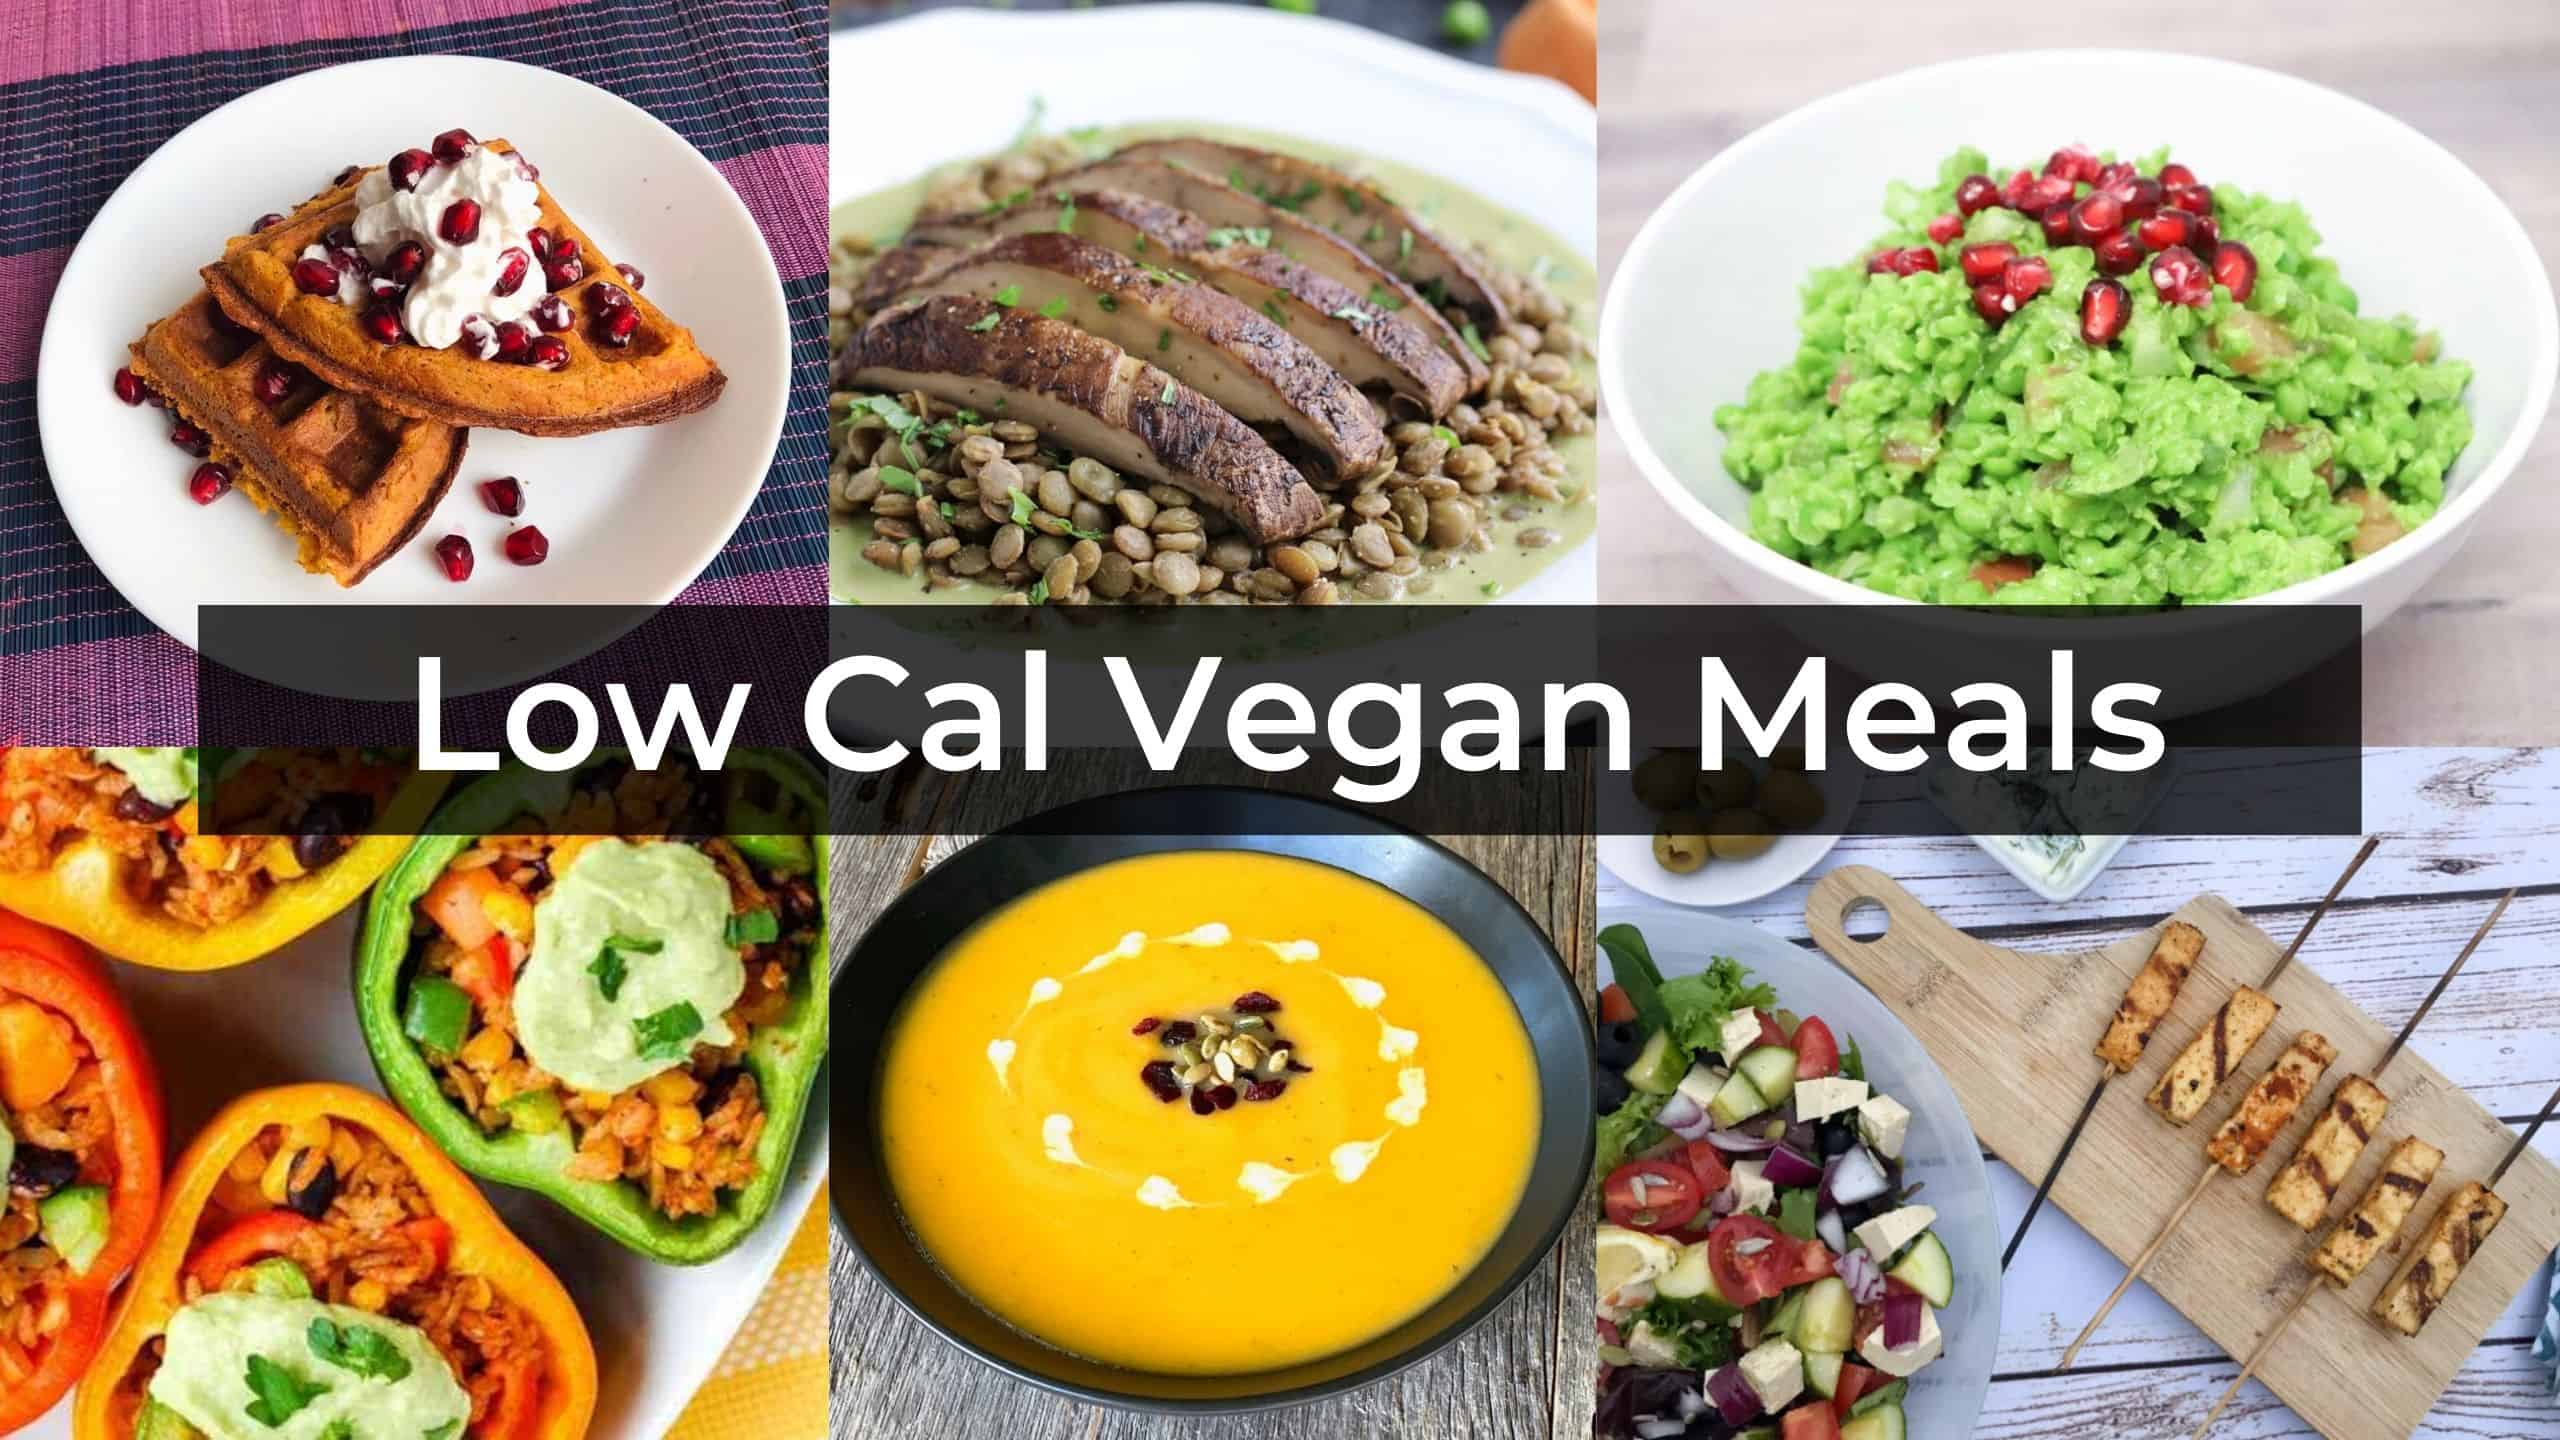 The Best Low Calorie Vegan Meals and Recipes